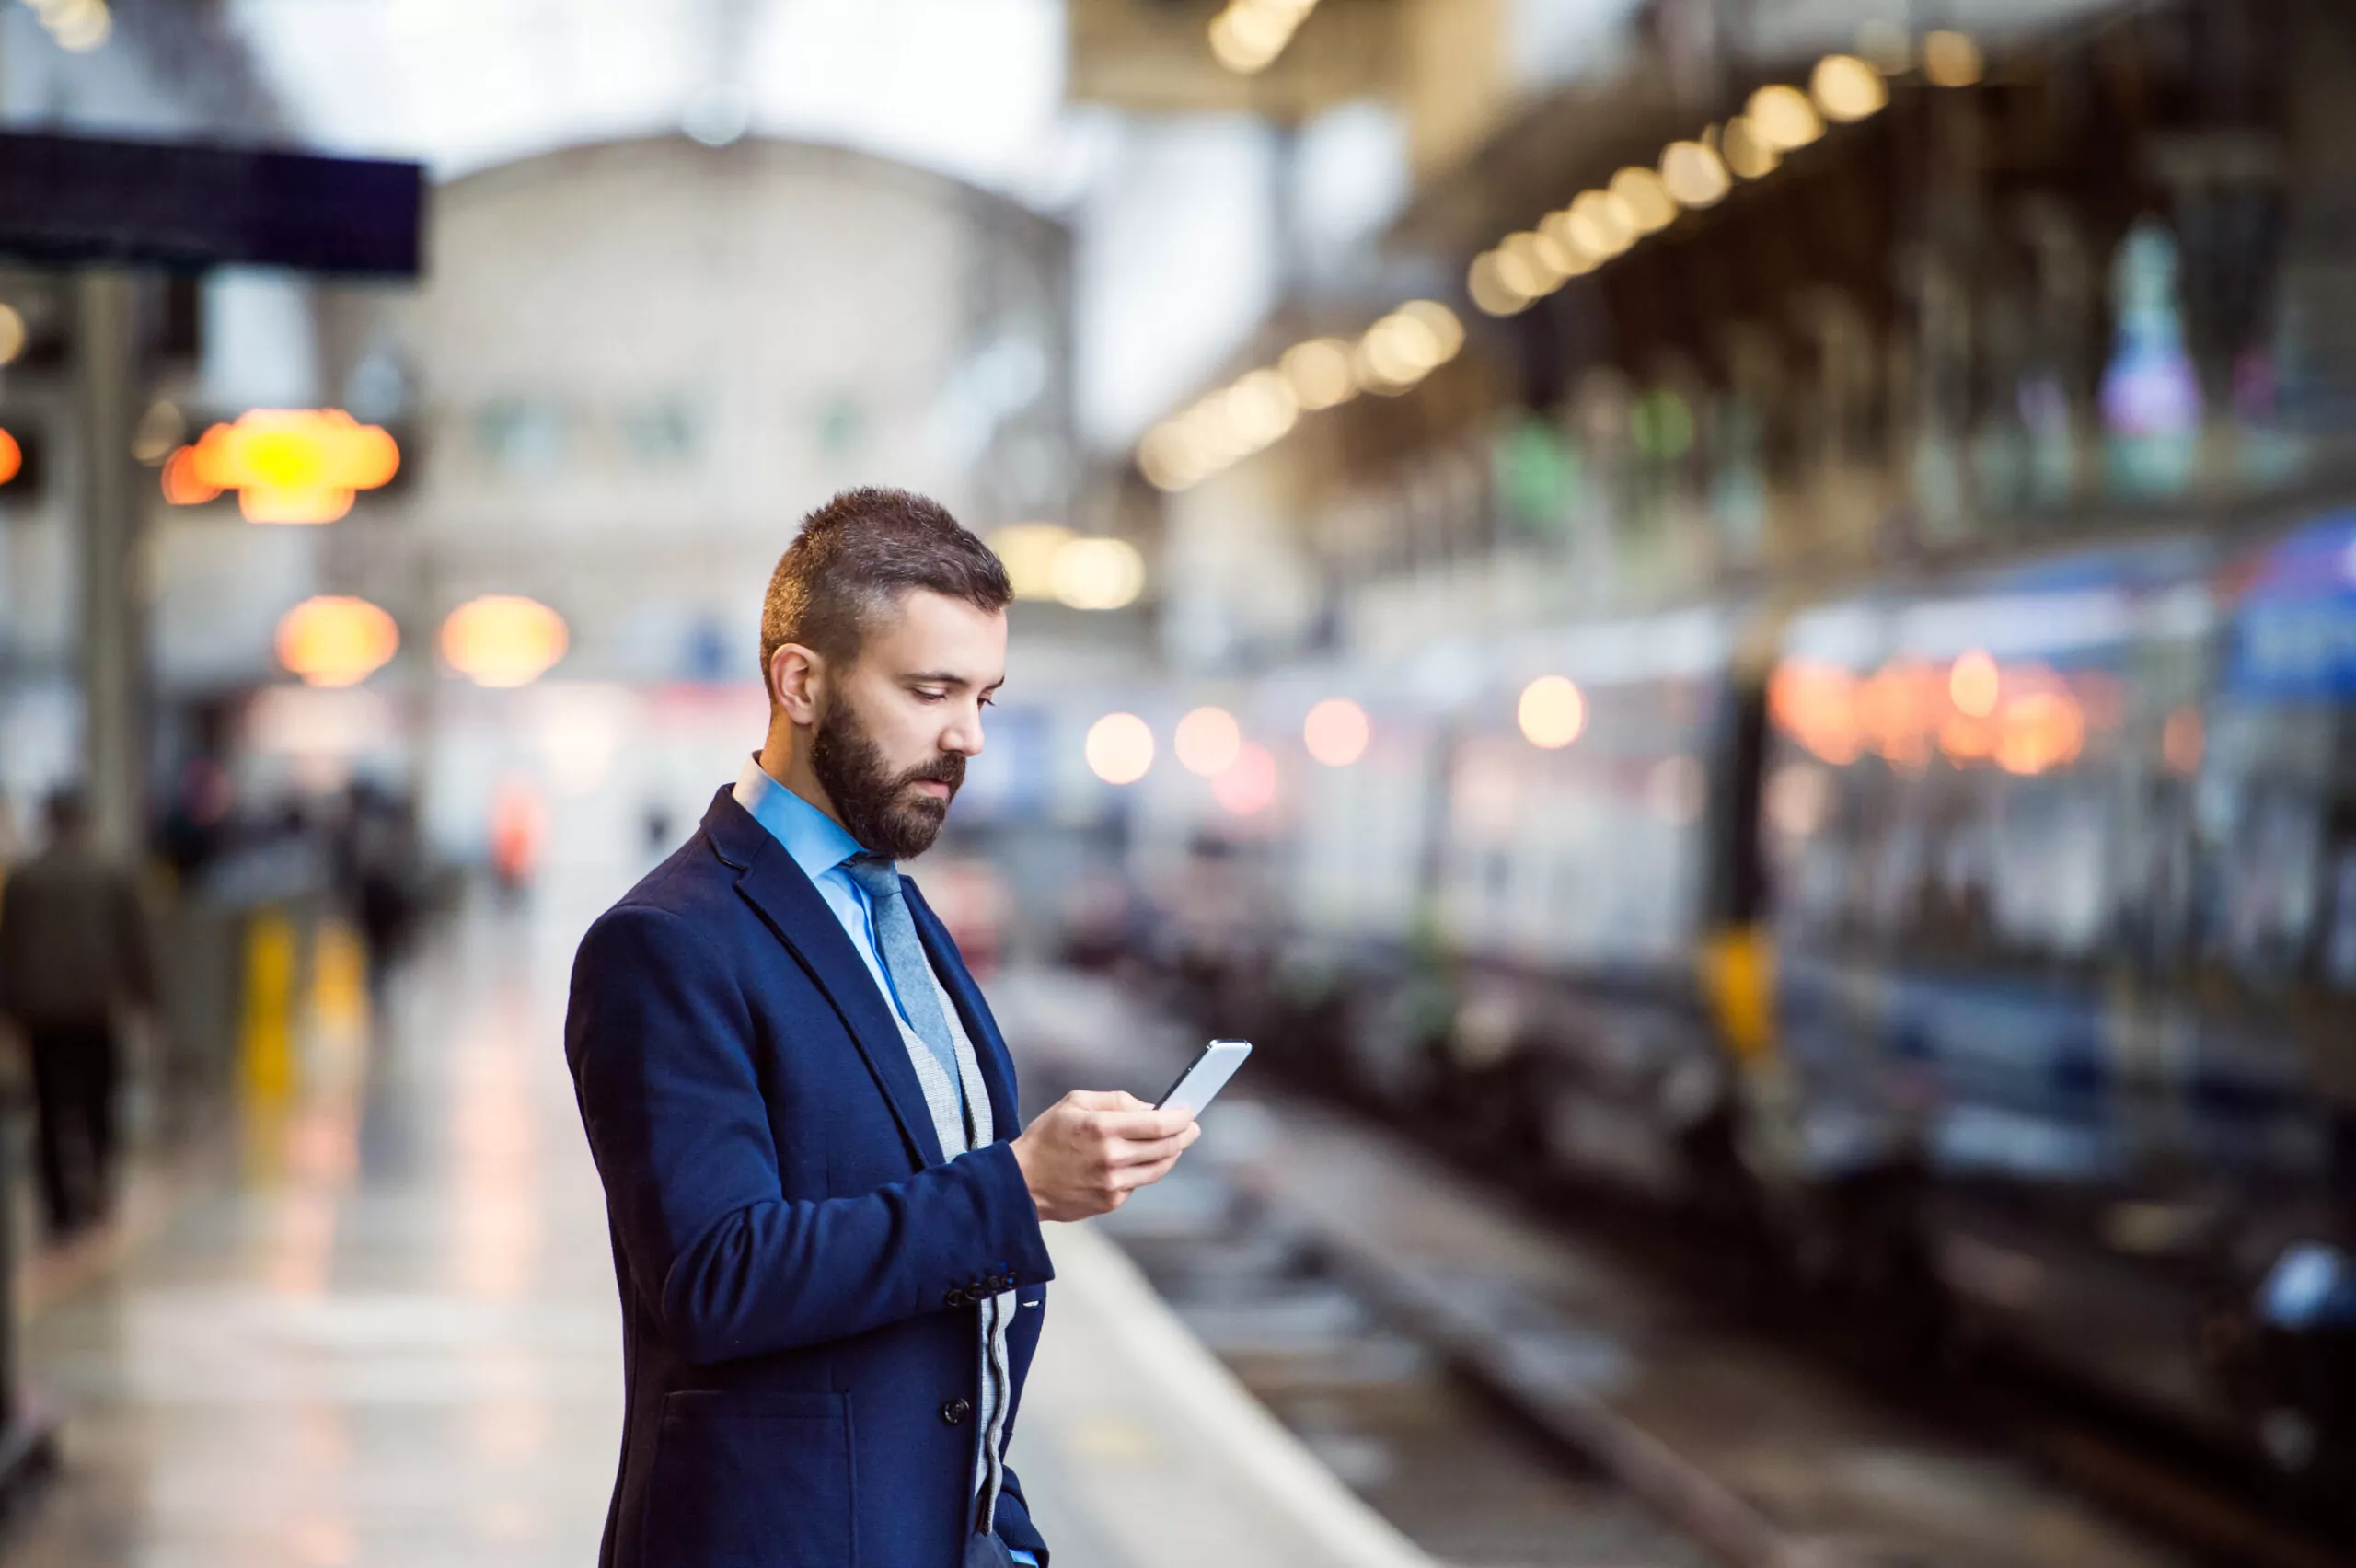 Commuter checking train timetable on phone